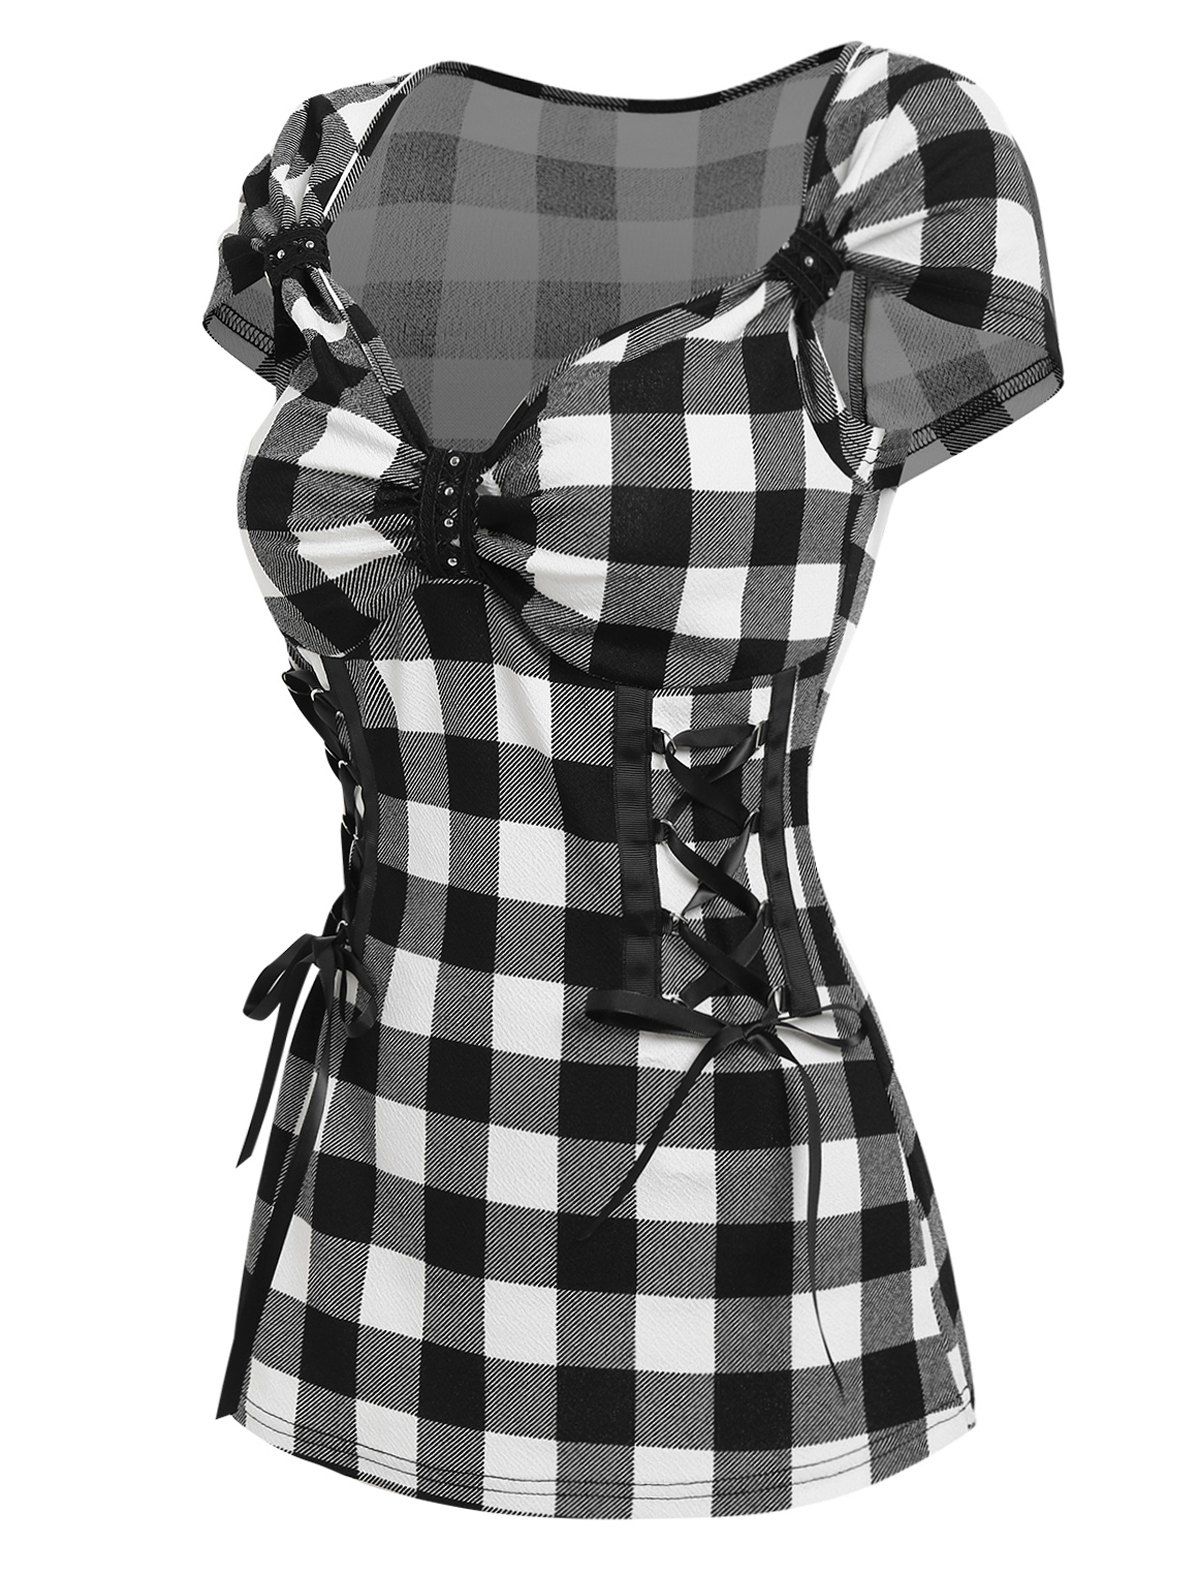 Corset Lace Up T Shirt Sweetheart Neck Plaid Checkerboard Tee - BLACK S